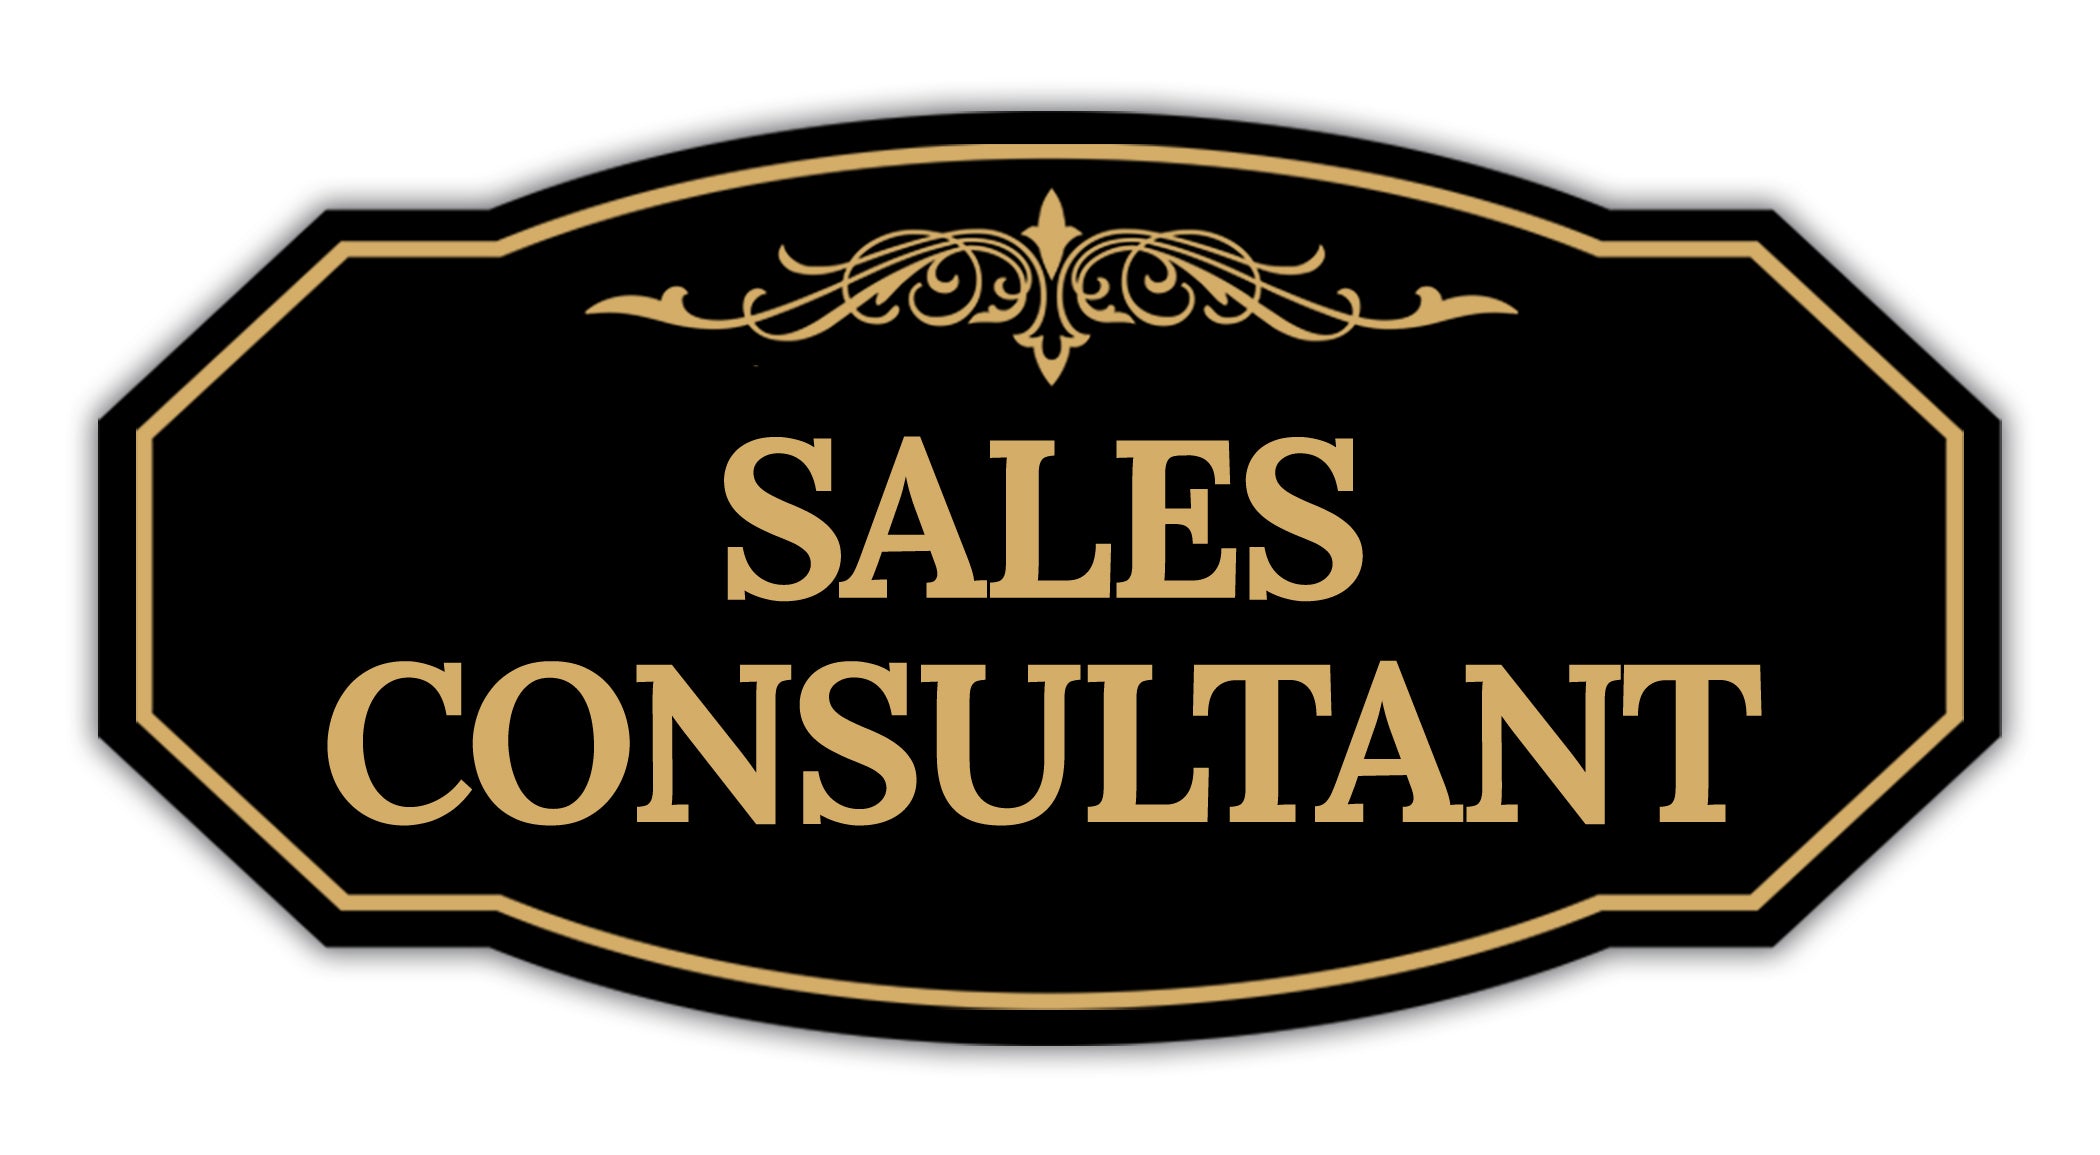 Signs ByLITA Victorian Sales Consultant Graphic Wall or Door Sign